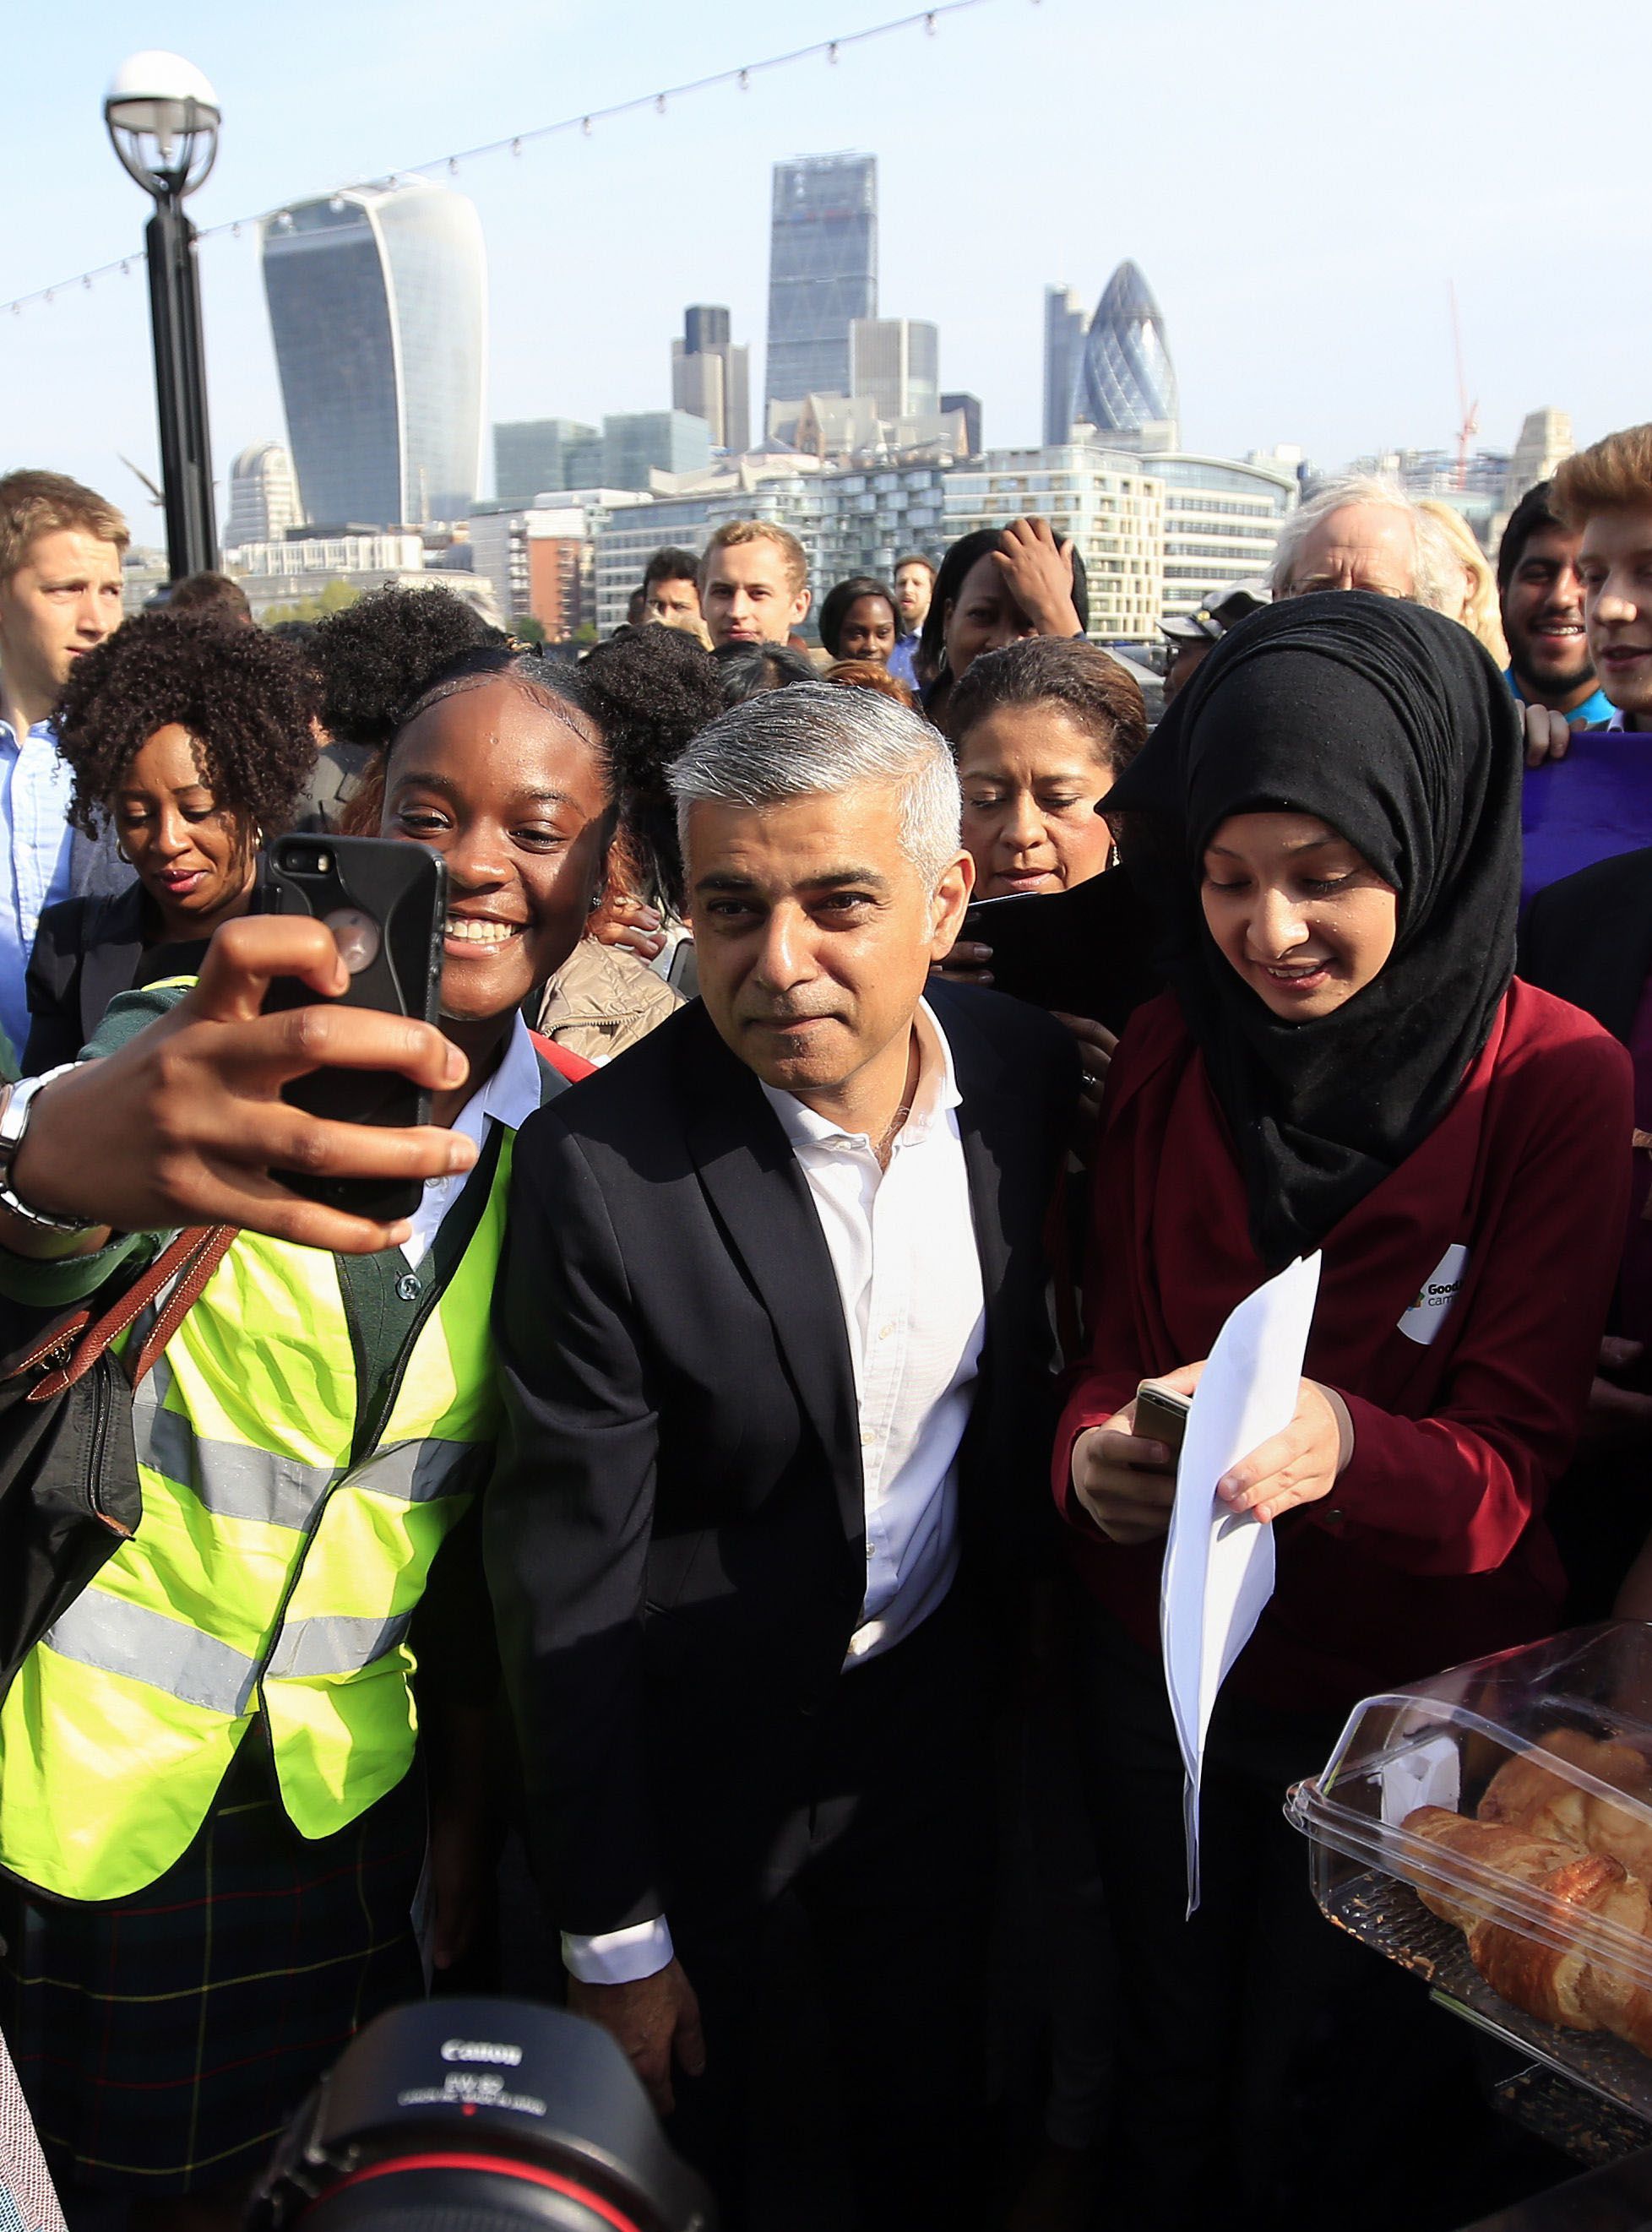 Newly elected London mayor Sadiq Khan is greeted by well-wishers outside City Hall in London on his first day as mayor Monday. Khan called Trump’s view of Islam “ignorant.”